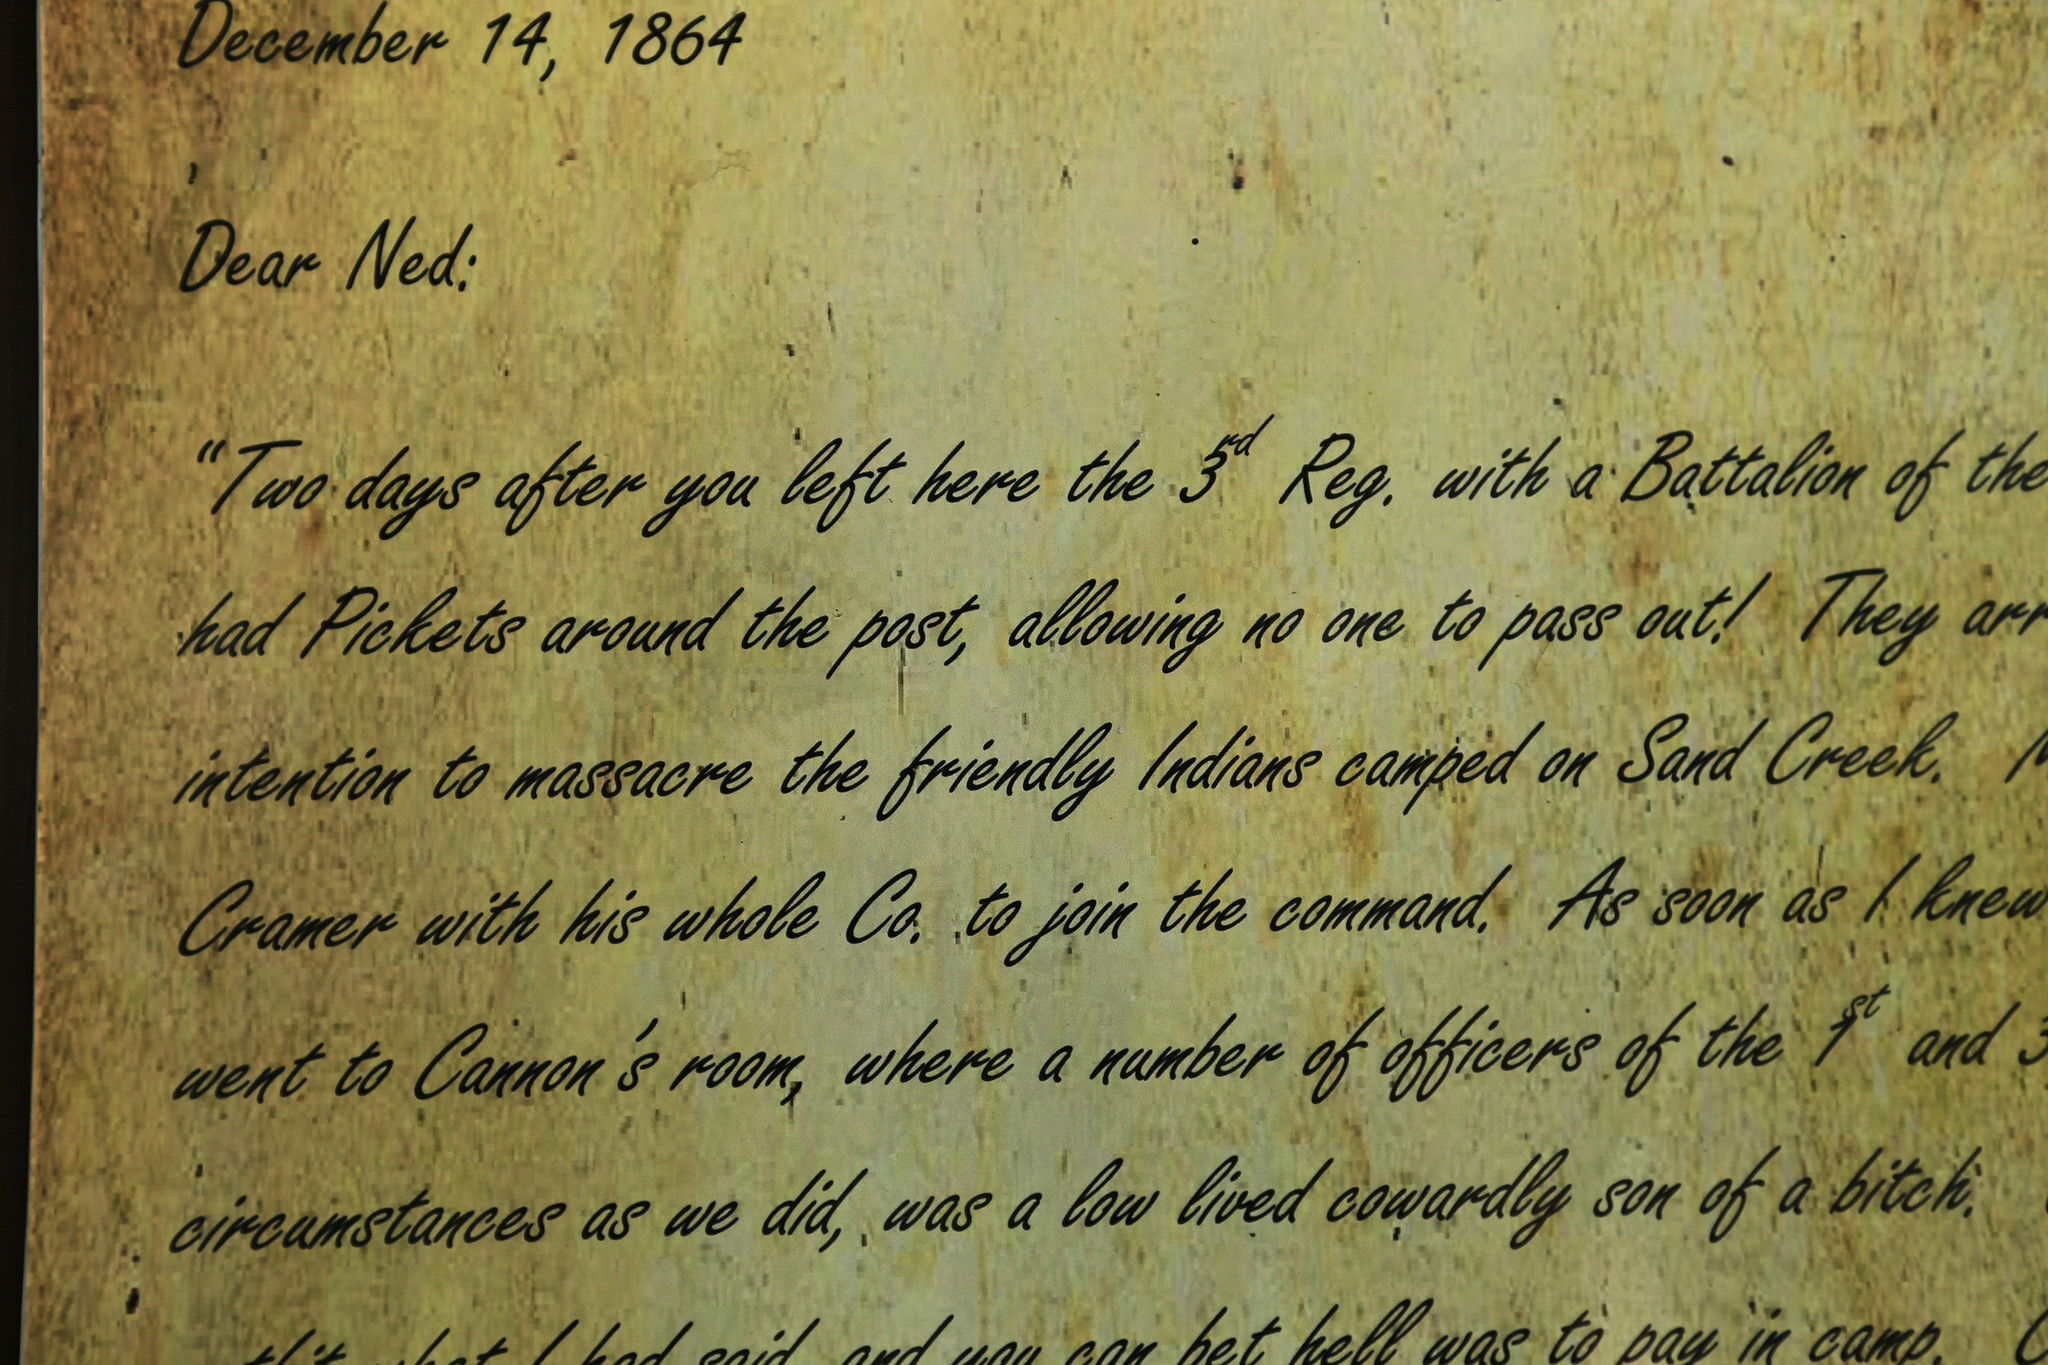 A detail of a letter written by a witness of the massacre.